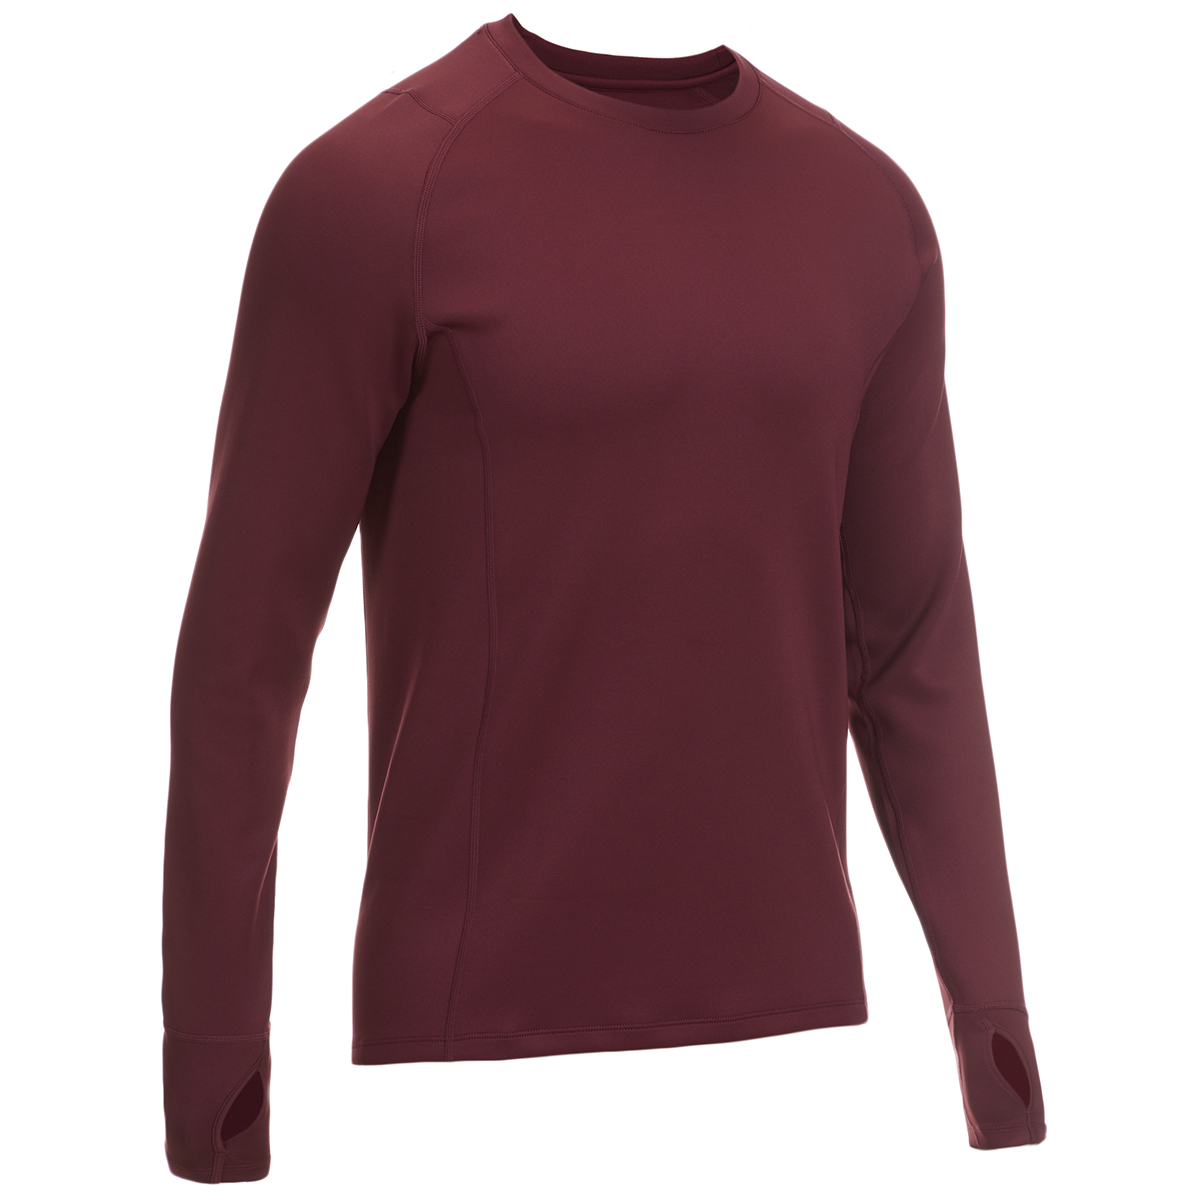 Ems Men's Heavyweight Synthetic Base Layer Crew